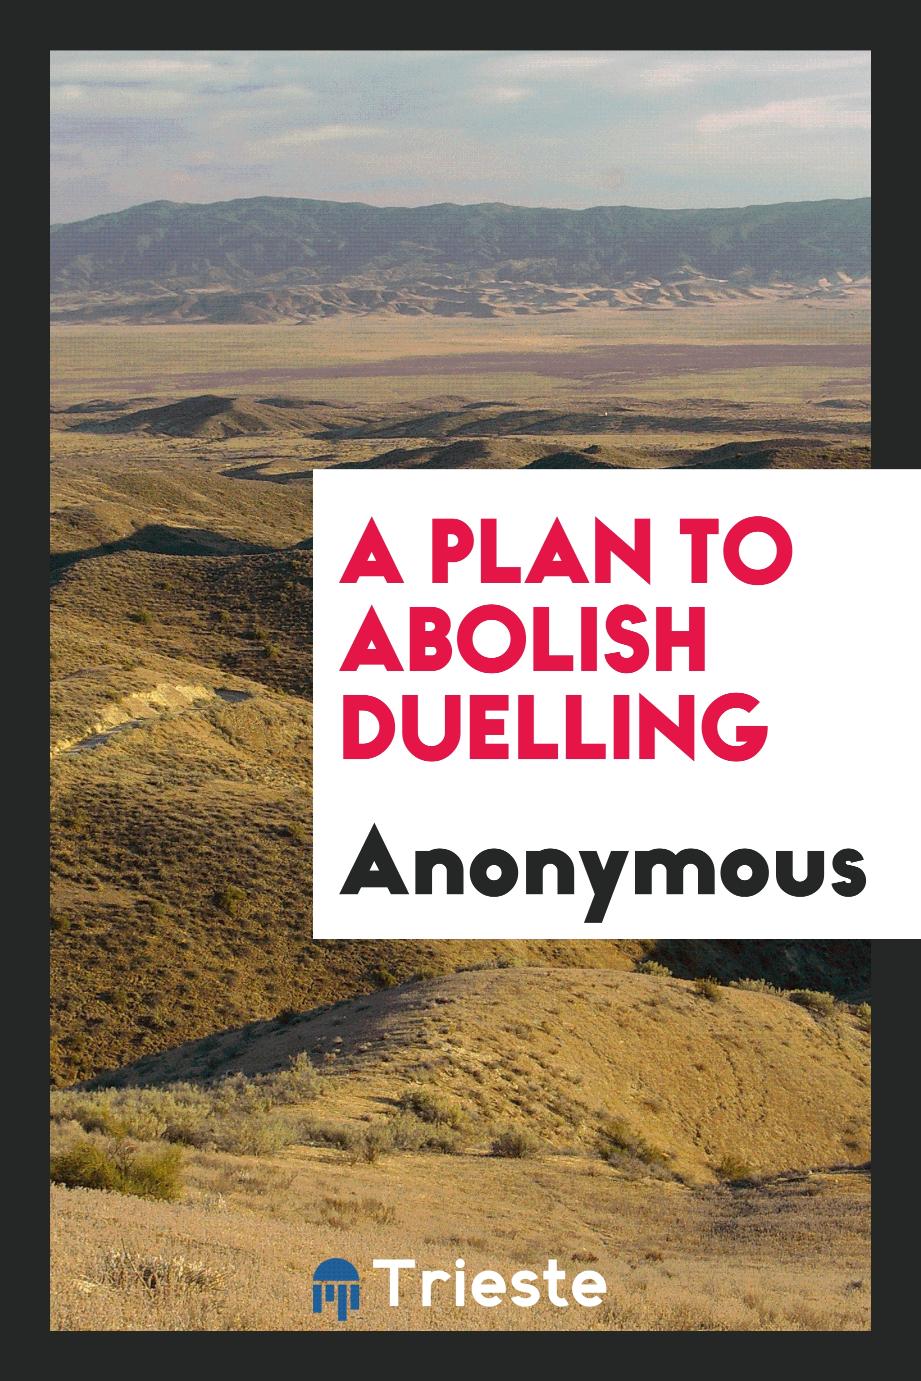 A plan to abolish duelling